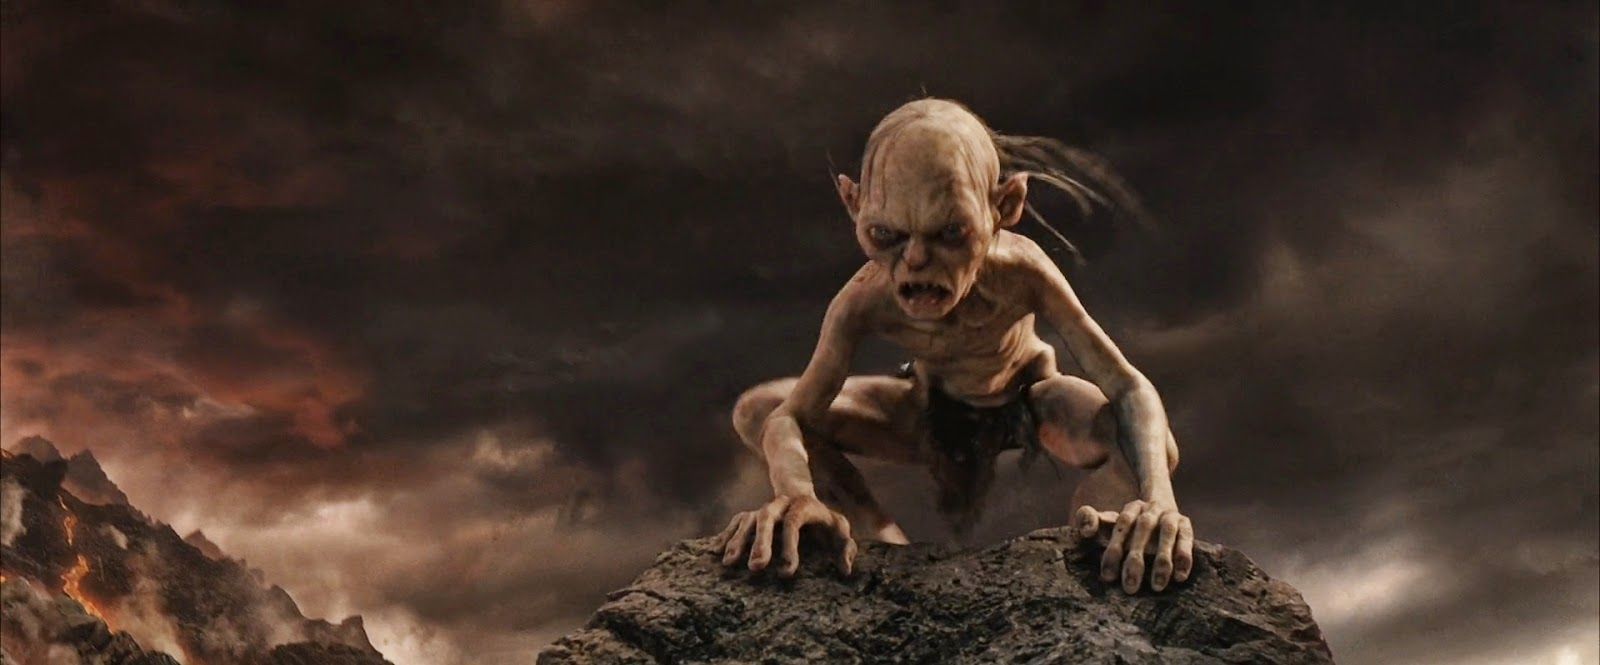 Gollum Mount Doom Lord of the Rings